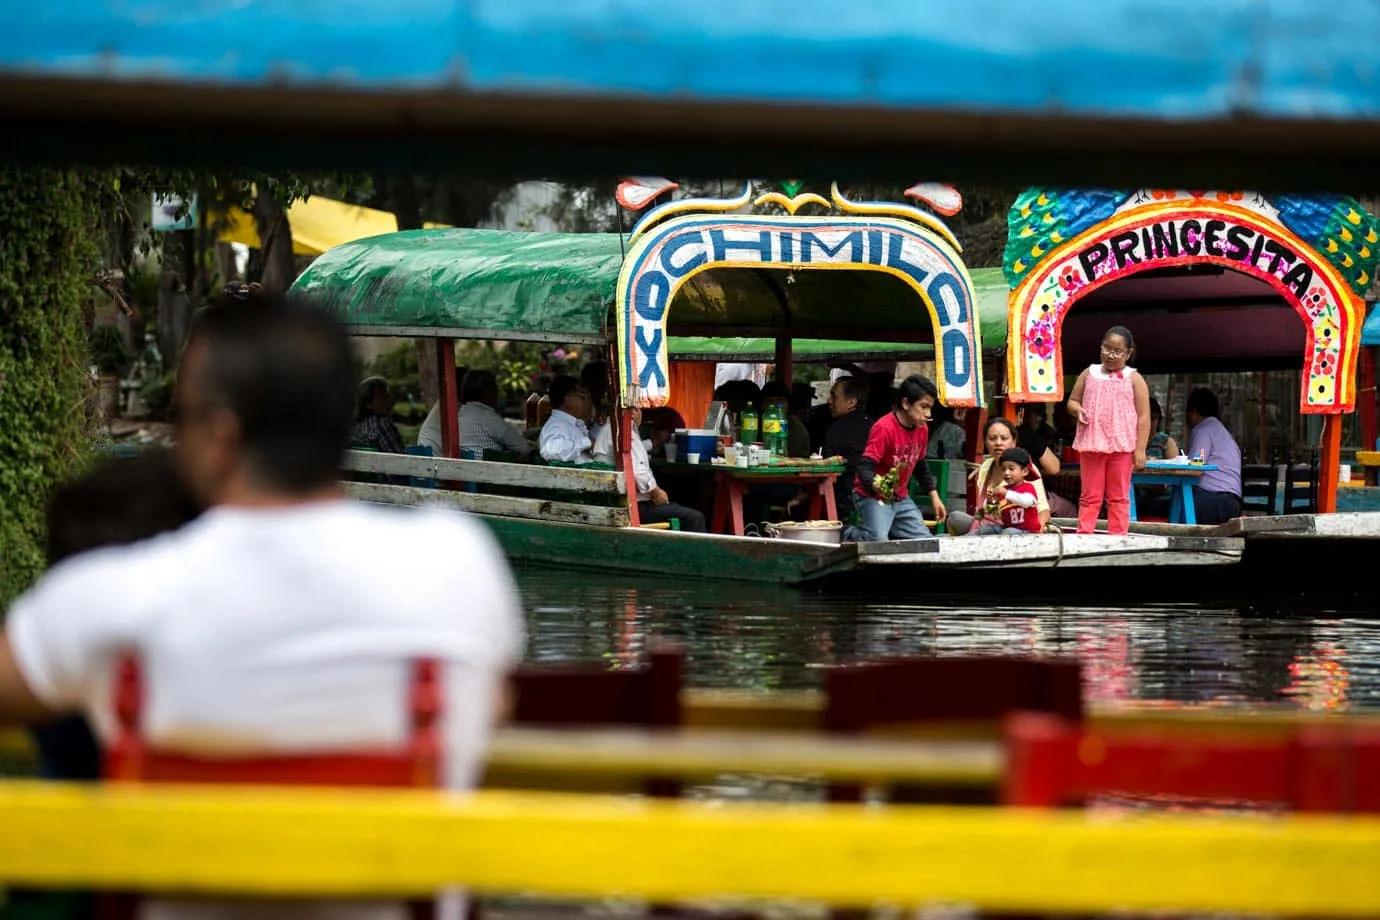 Xochimilco is a town made up of canals an hour’s south of Mexico City